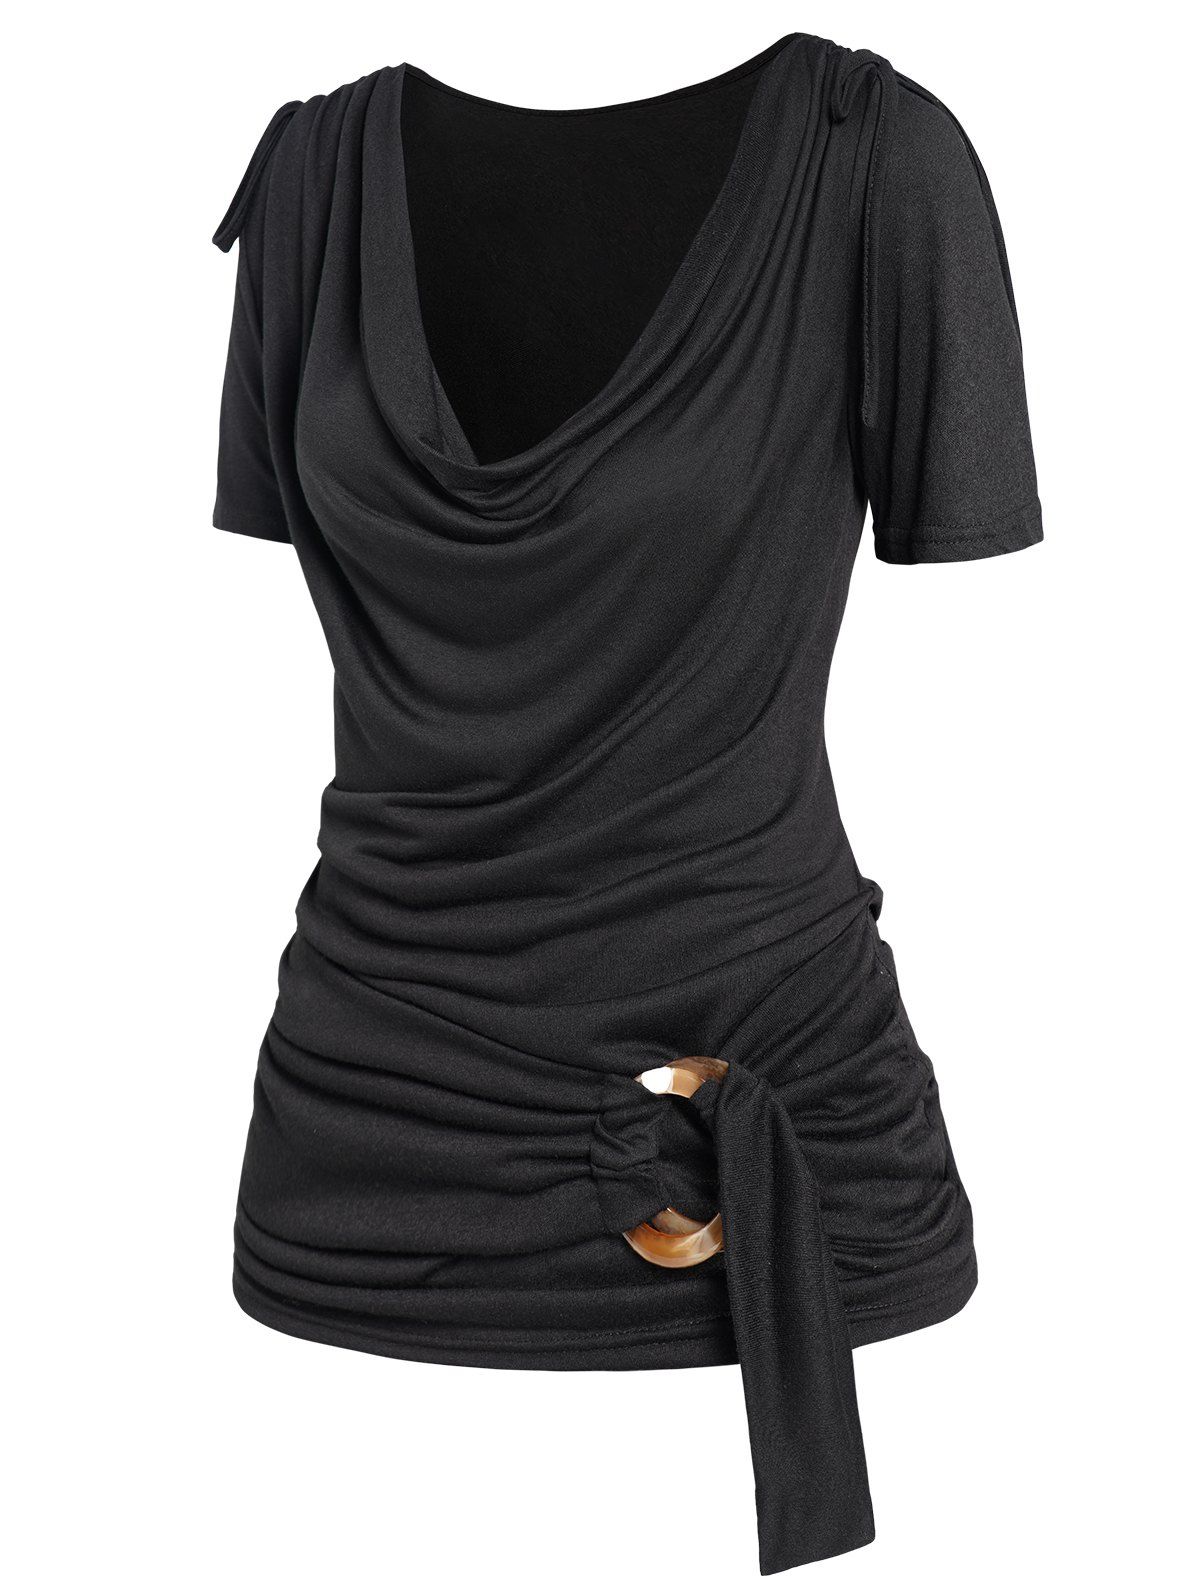 Draped T Shirt O Ring Plain Color Cowl Neck Cinched Shoulder Casual Tee - BLACK S